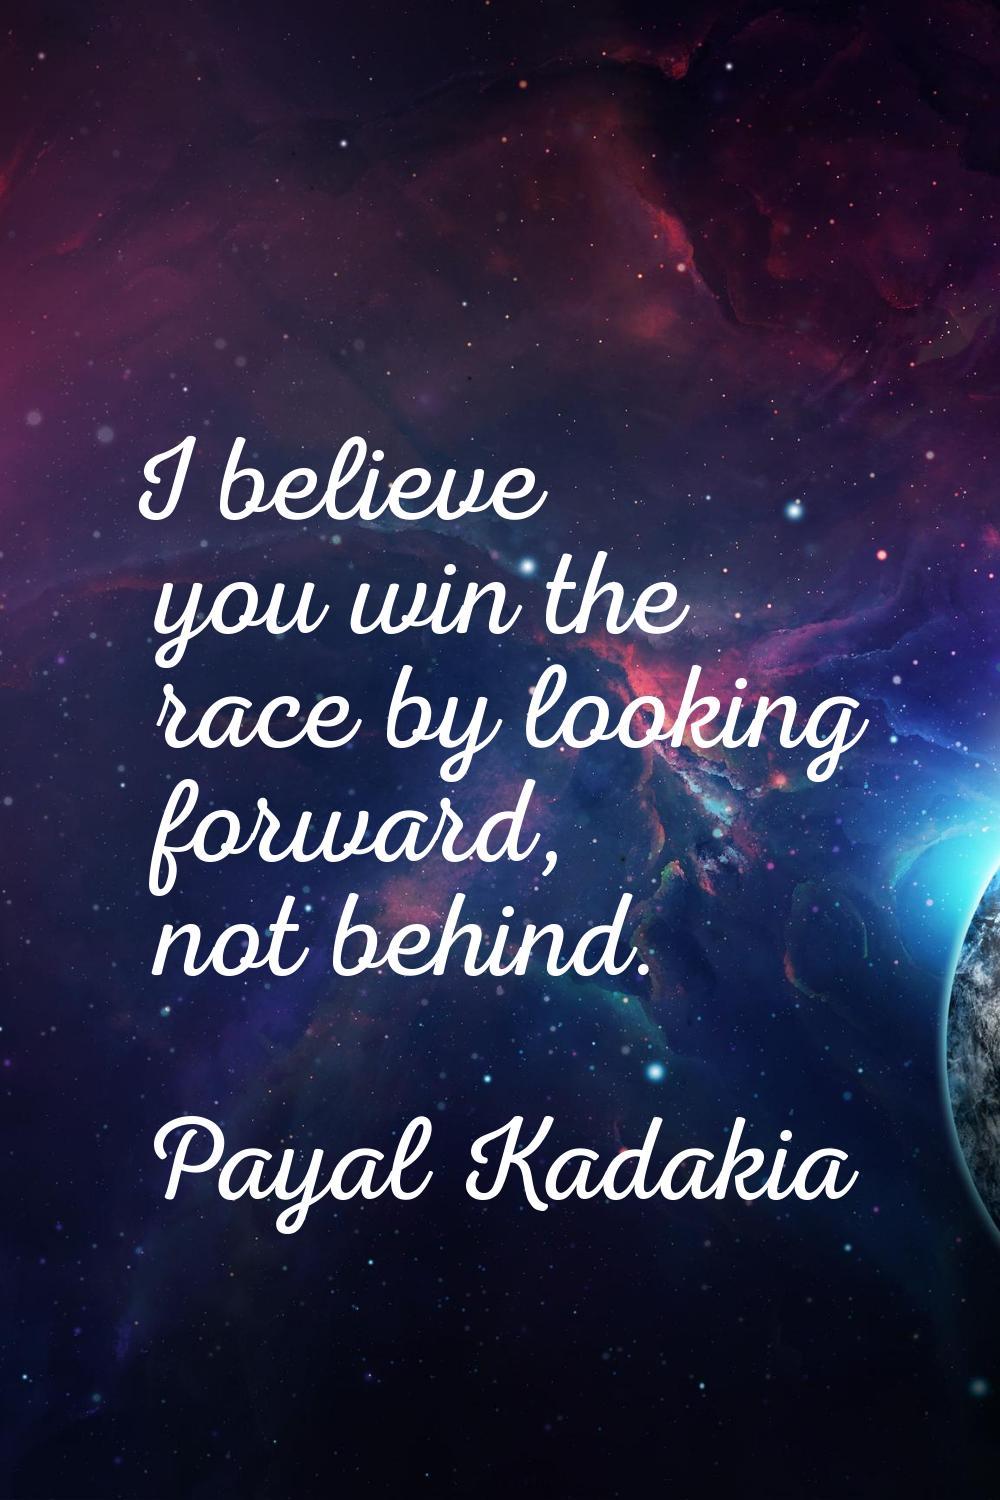 I believe you win the race by looking forward, not behind.